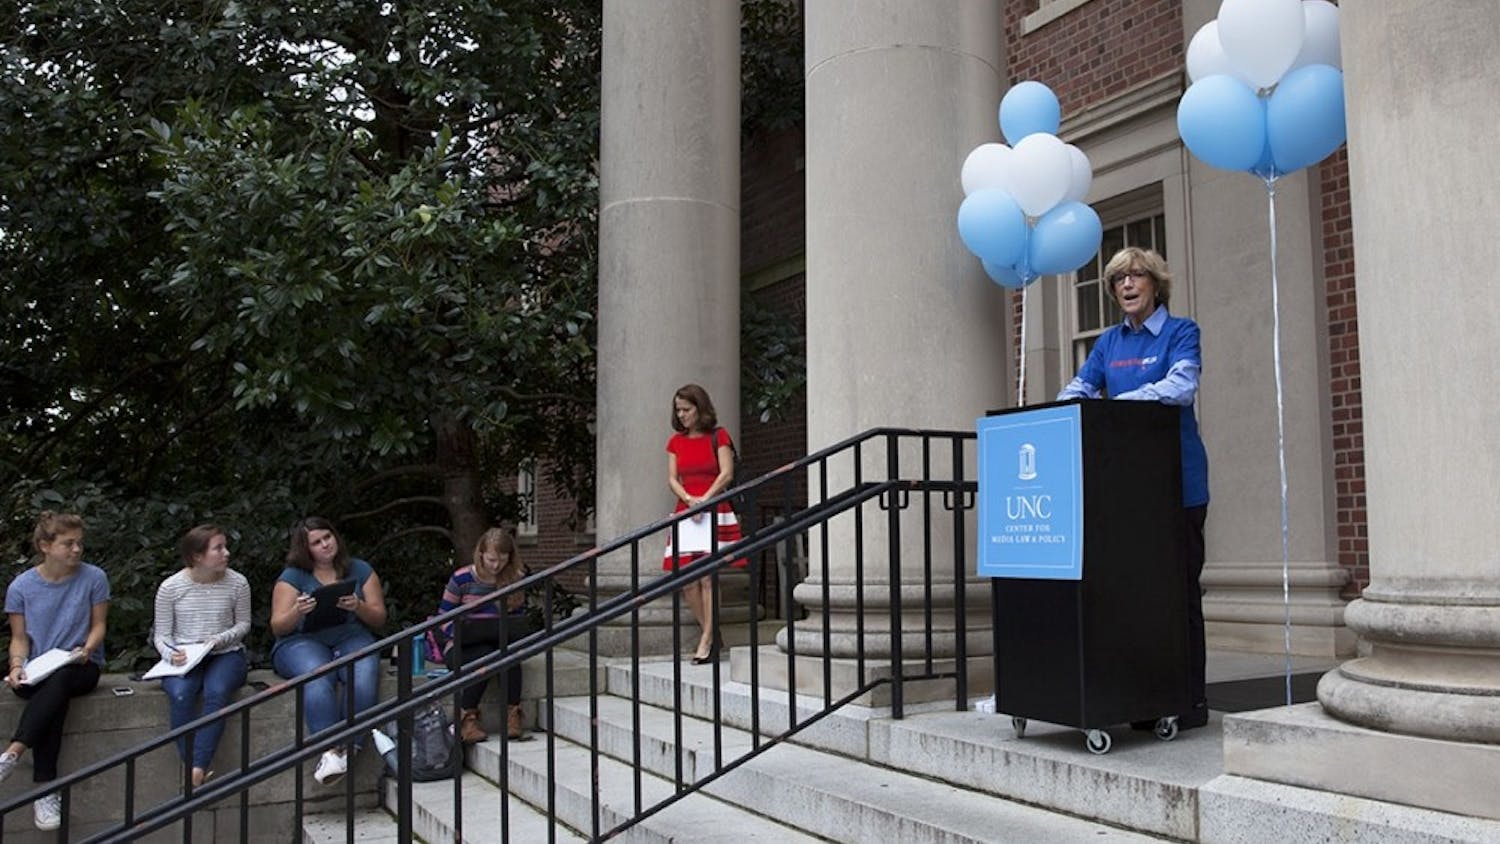 Susan King, the Dean of the School of Media and Journalism, speaks at the First Amendment Day opening ceremony in 2015.